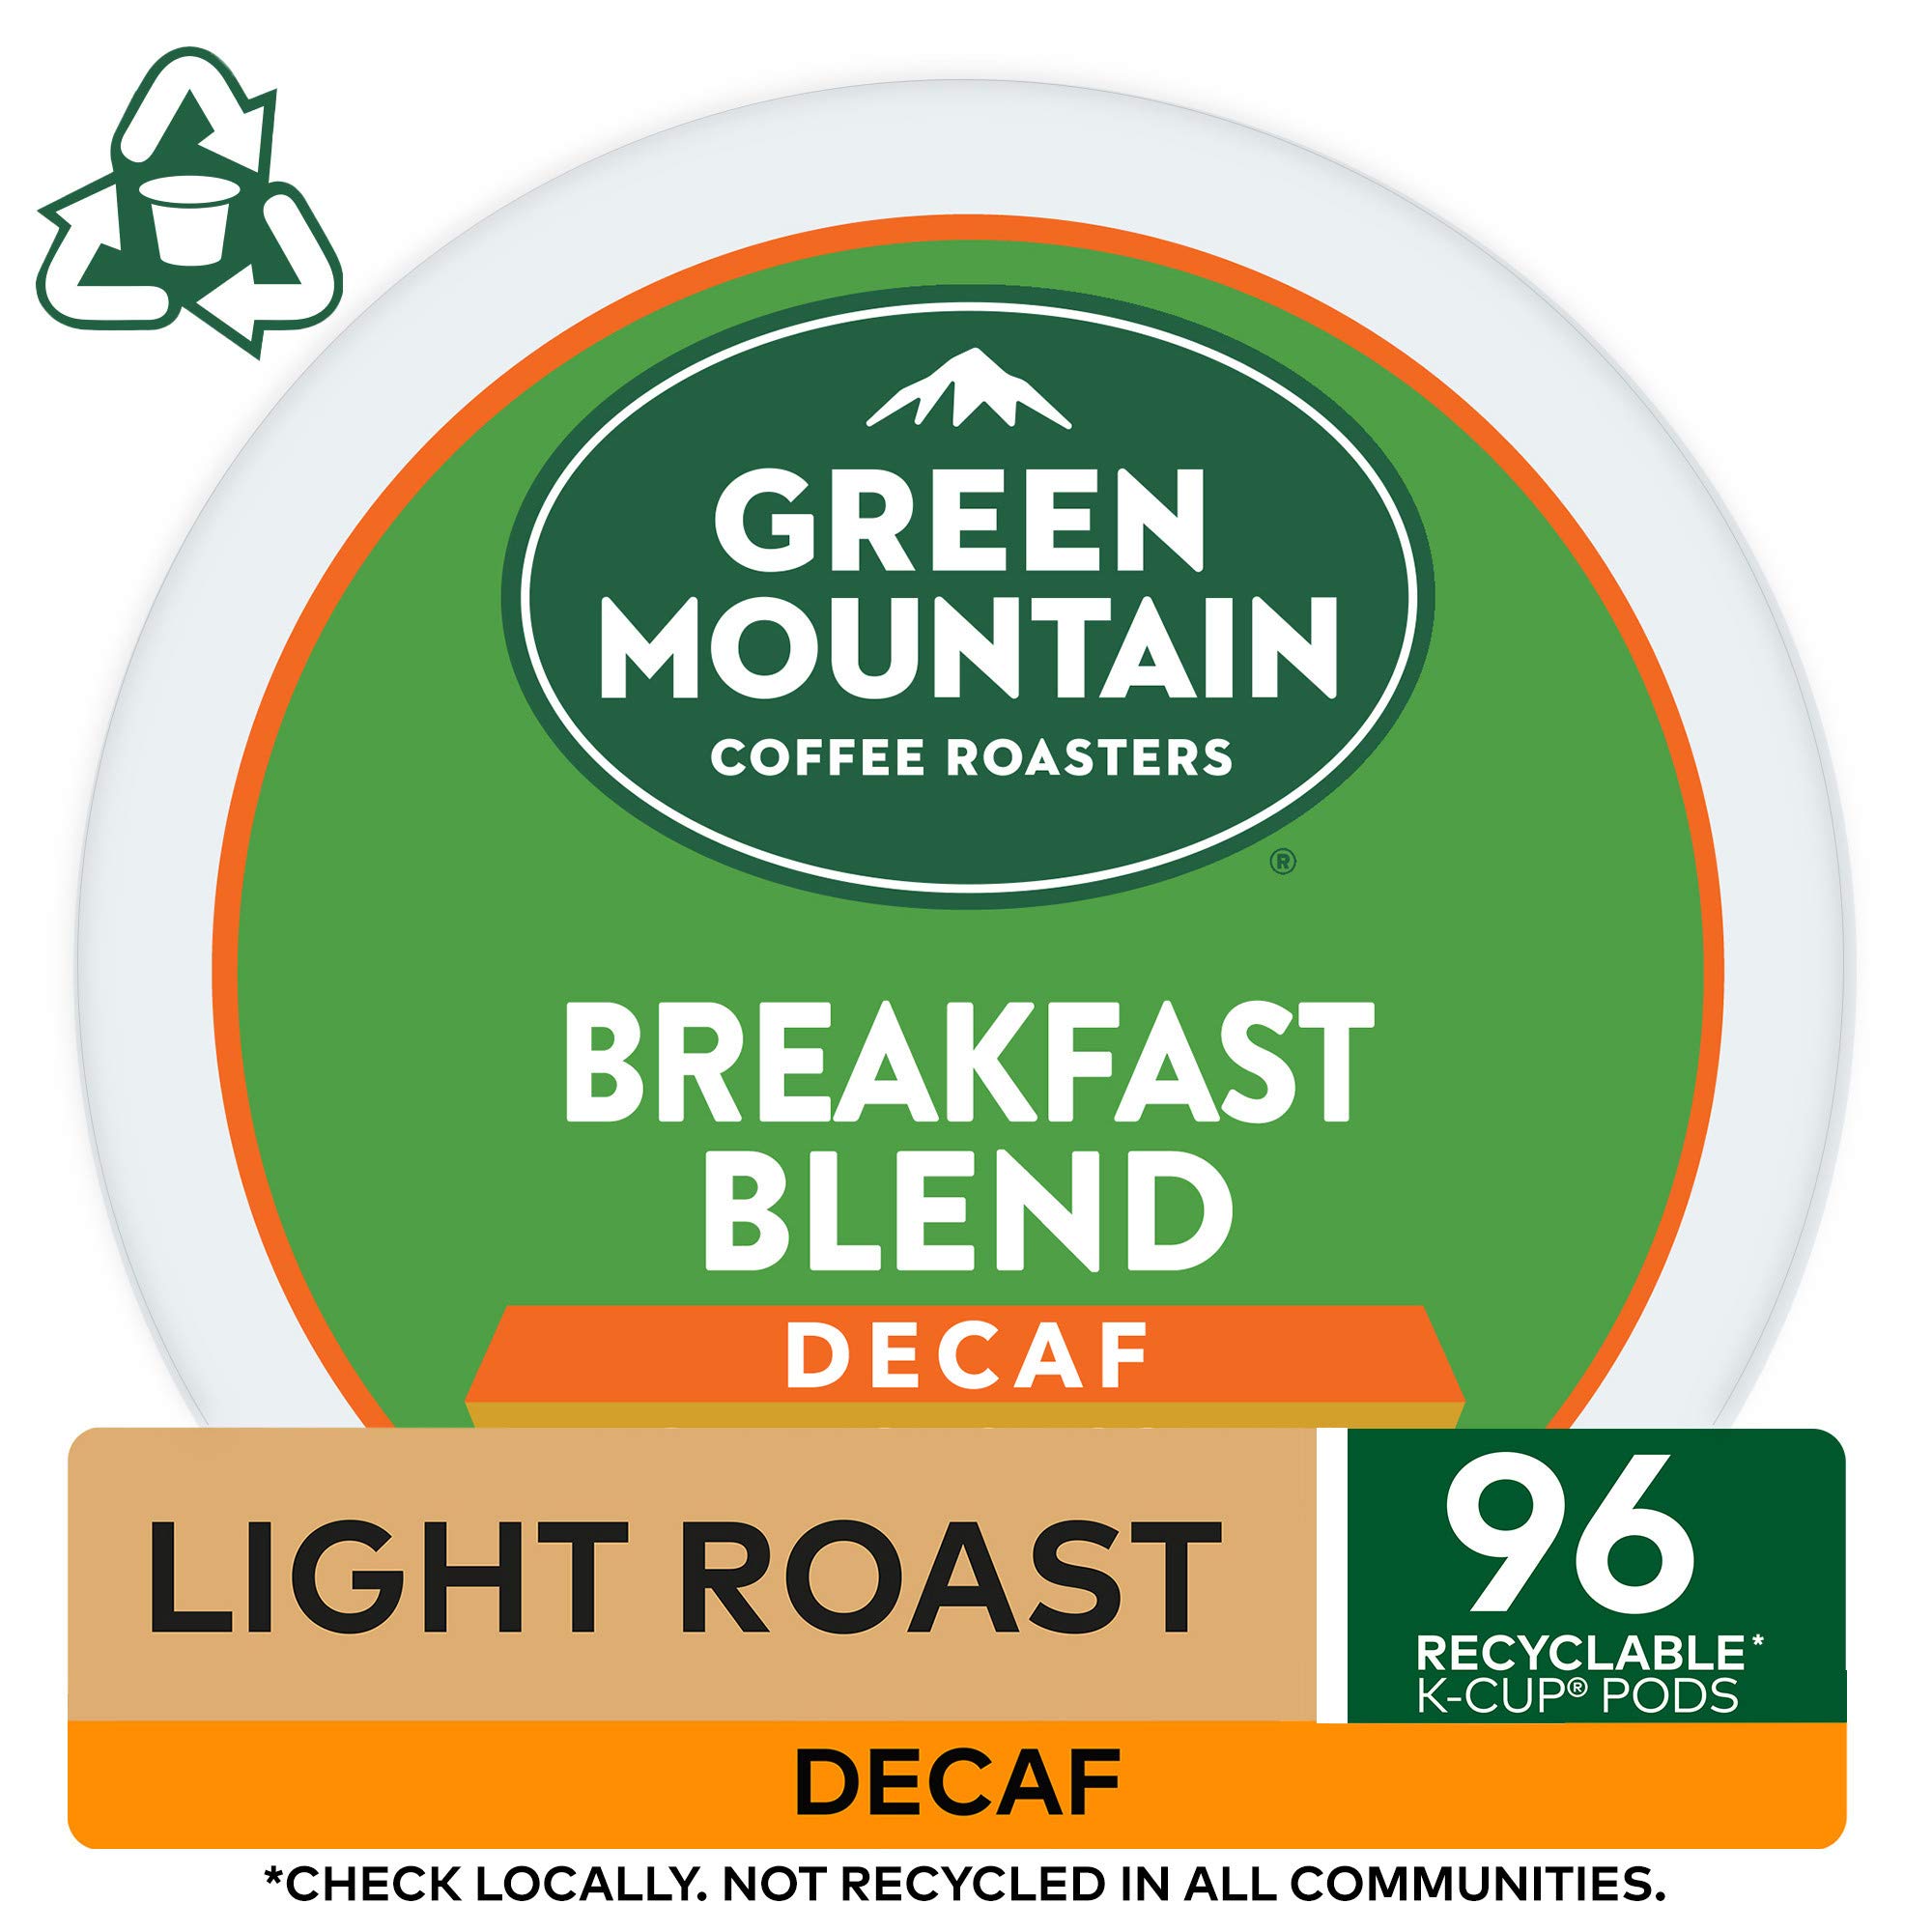 Green Mountain Coffee, Breakfast Blend Decaf, Single-Serve Keurig K-Cup Pods, Light Roast, 96 Count (4 Boxes of 24 Pods)~$28.36 @ Amazon~Free Prime Shipping!